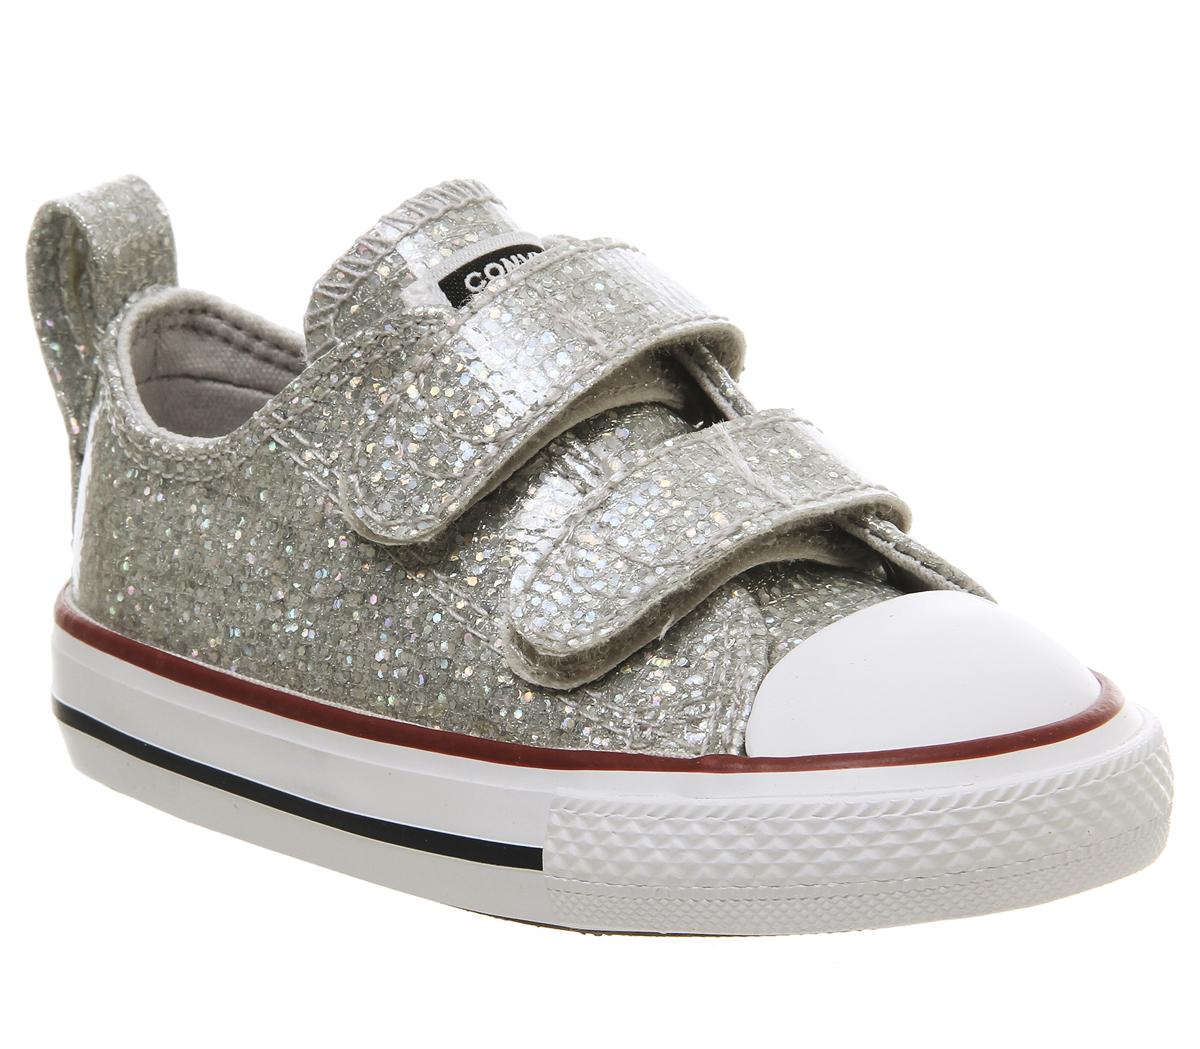 ConverseAll Star 2vlace TrainersMouse Glitter White